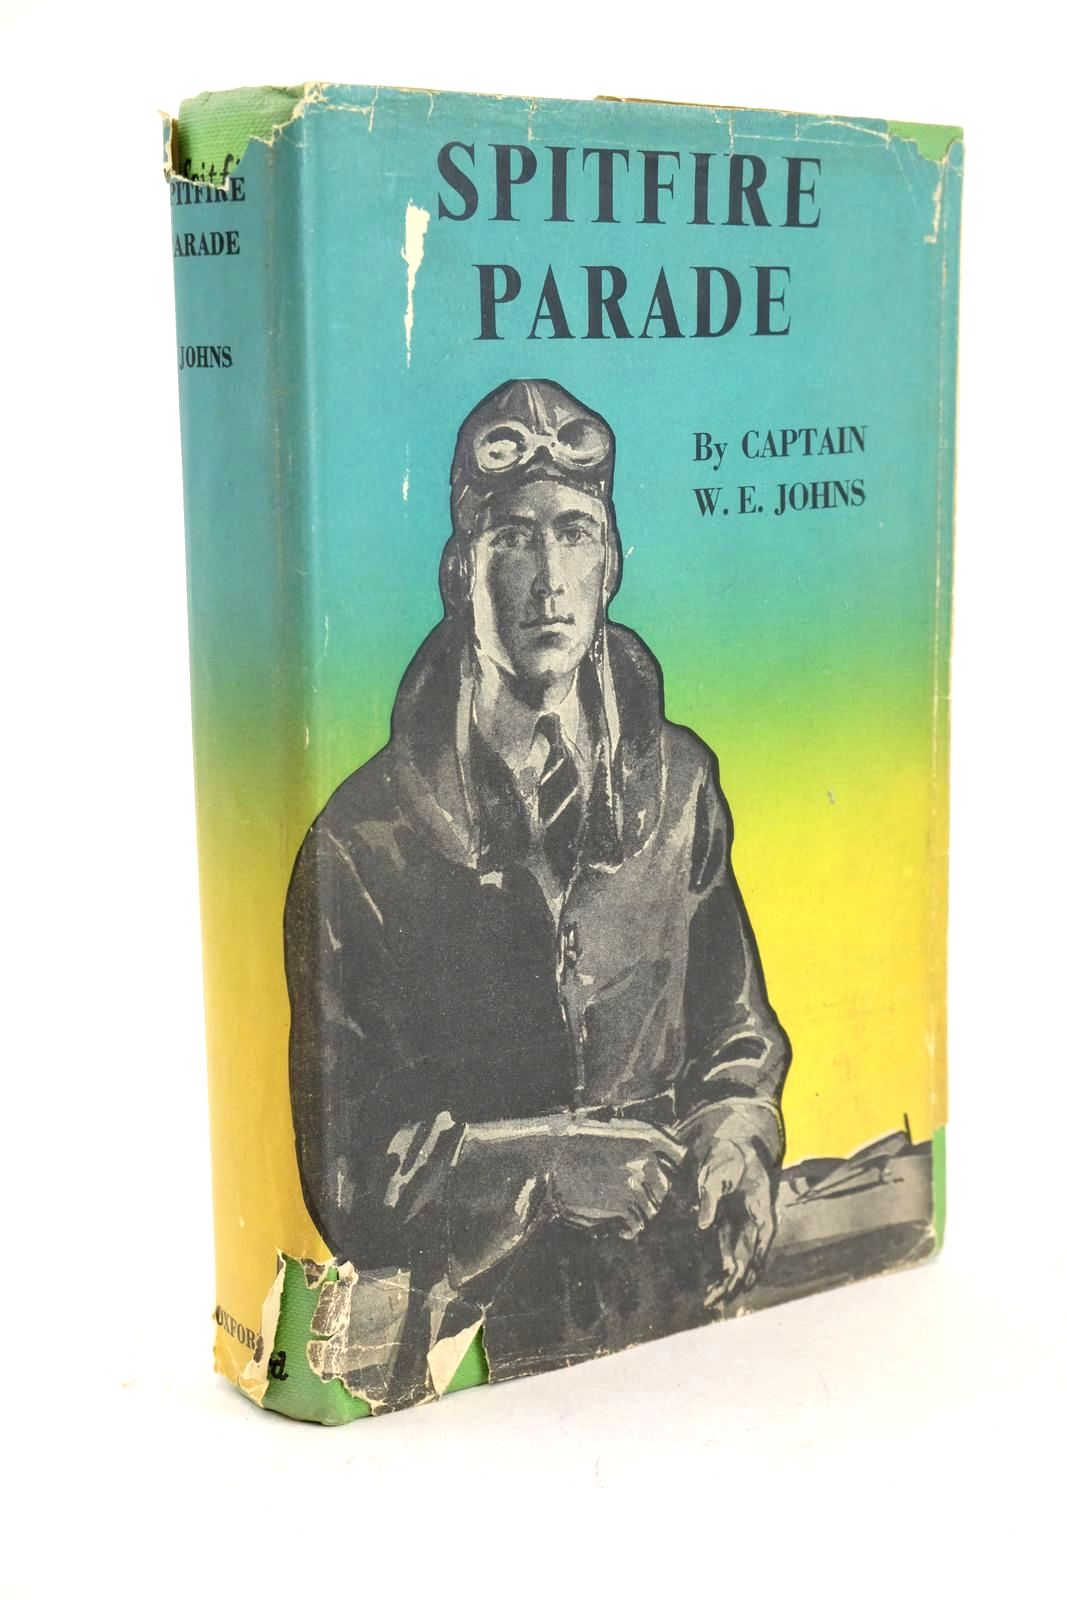 Photo of SPITFIRE PARADE written by Johns, W.E. illustrated by Wilson, Radcliffe published by Oxford University Press, Geoffrey Cumberlege (STOCK CODE: 1327205)  for sale by Stella & Rose's Books